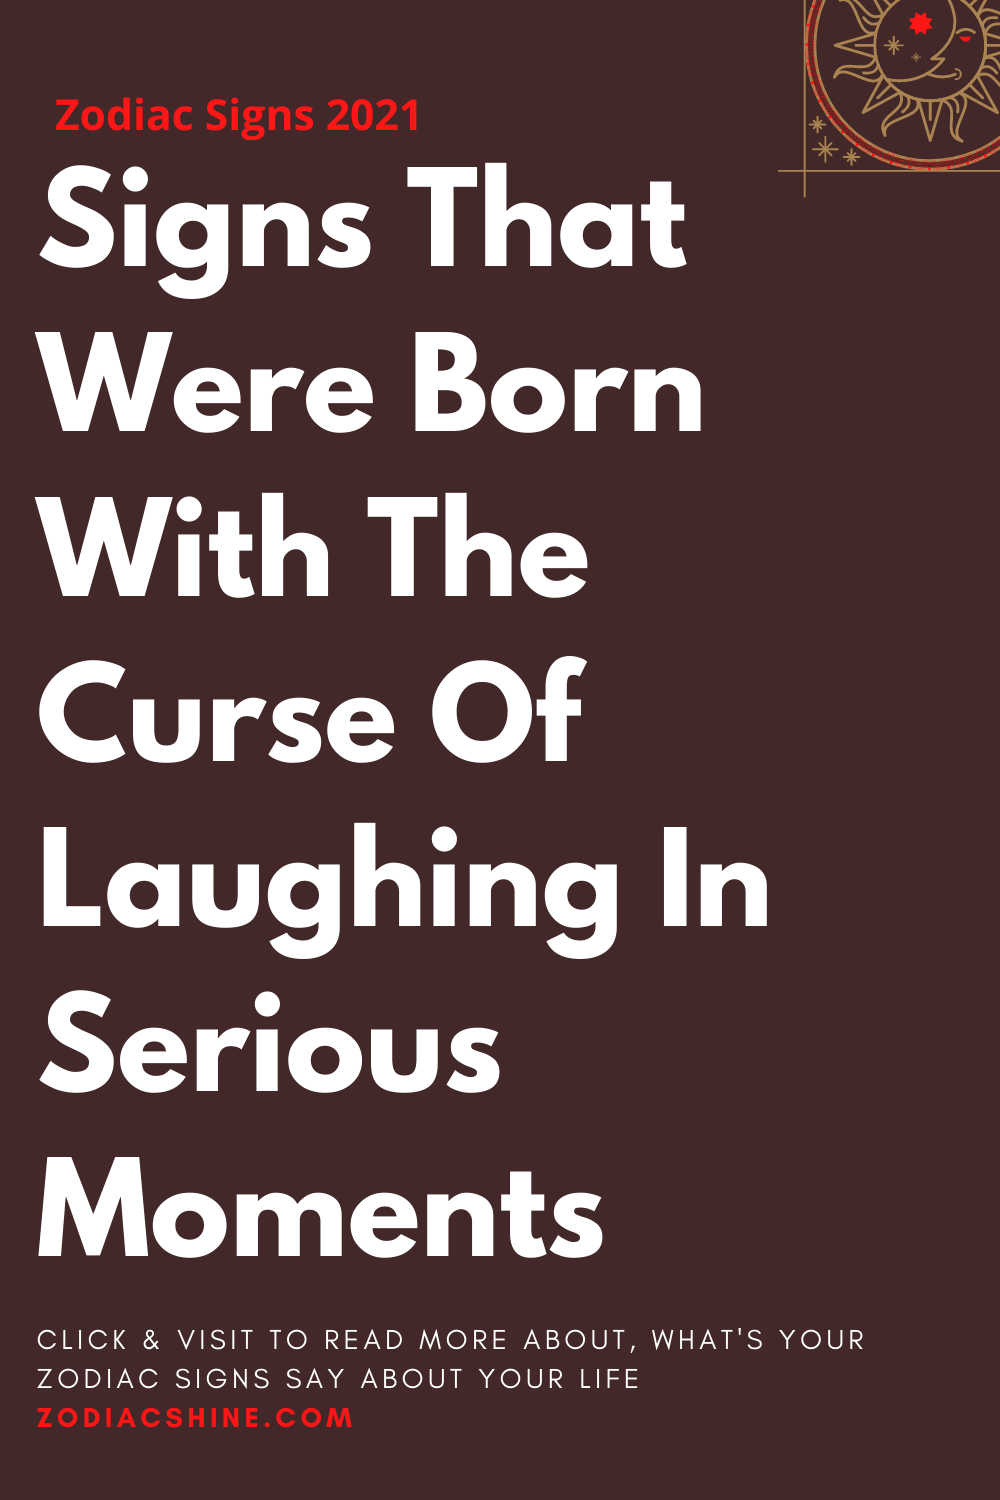 Signs That Were Born With The Curse Of Laughing In Serious Moments